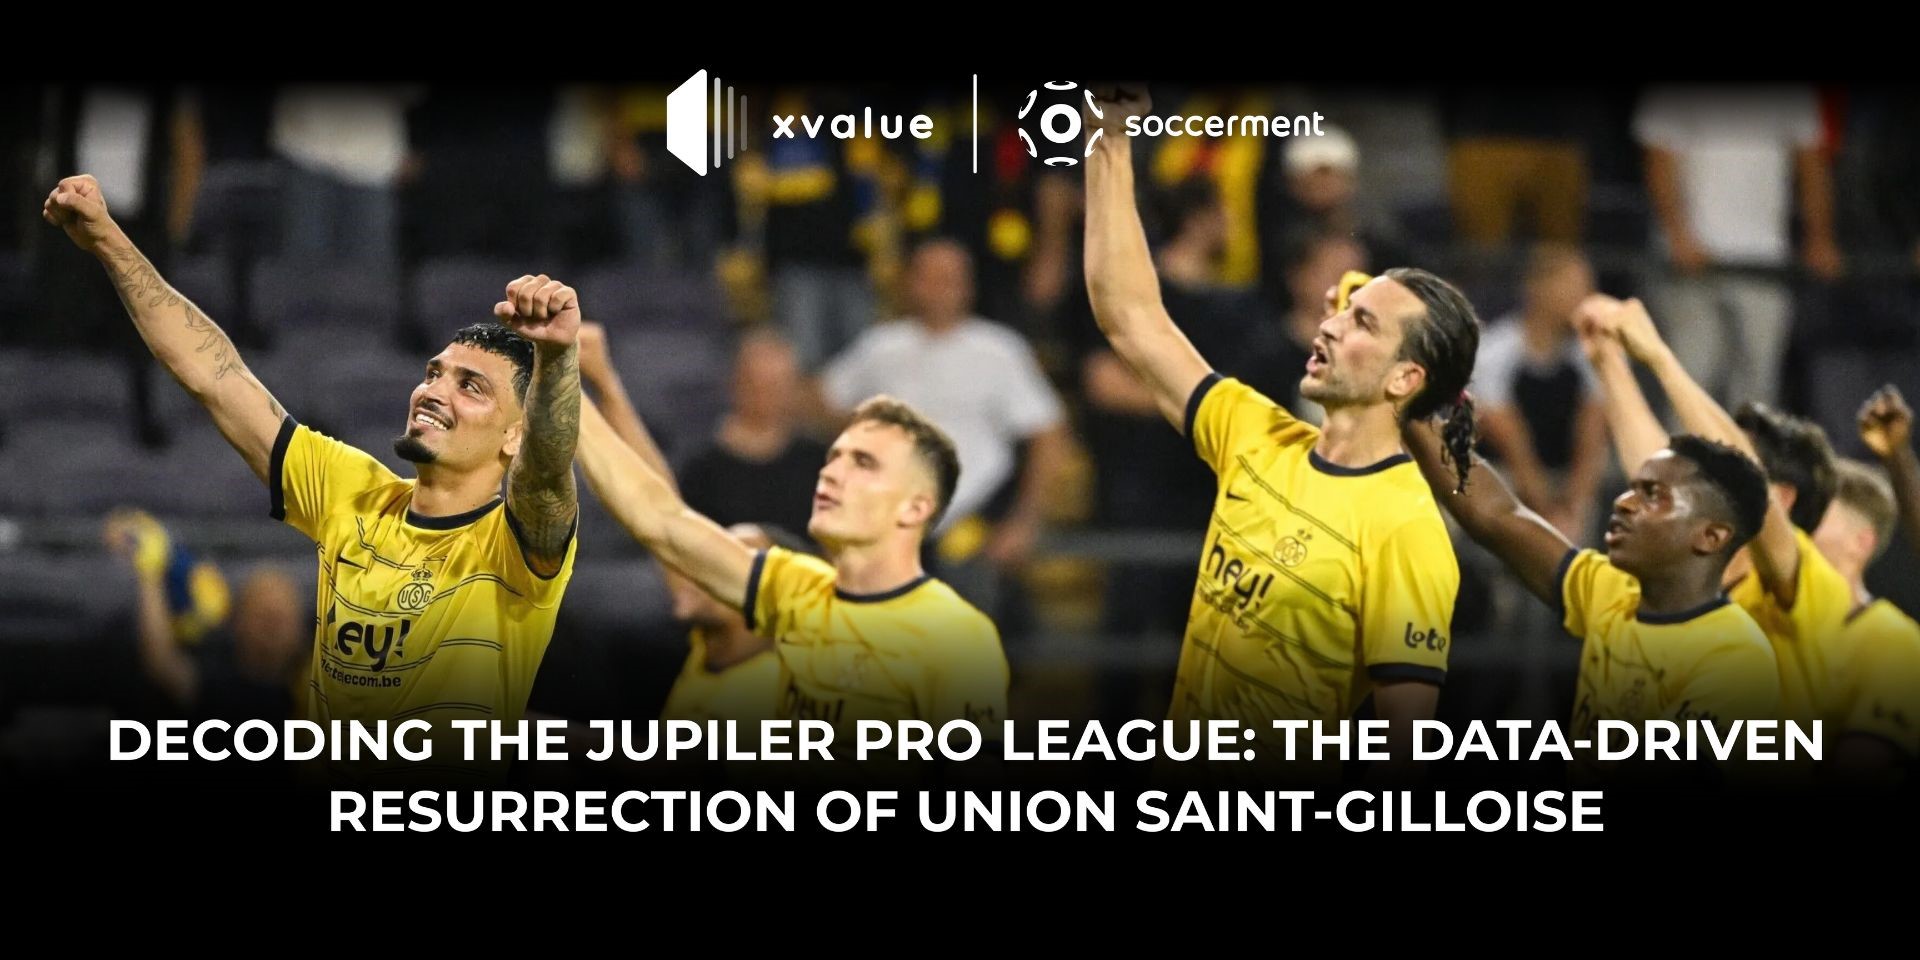 The data-driven revival of Union Saint-Gilloise in the Jupiler Pro League